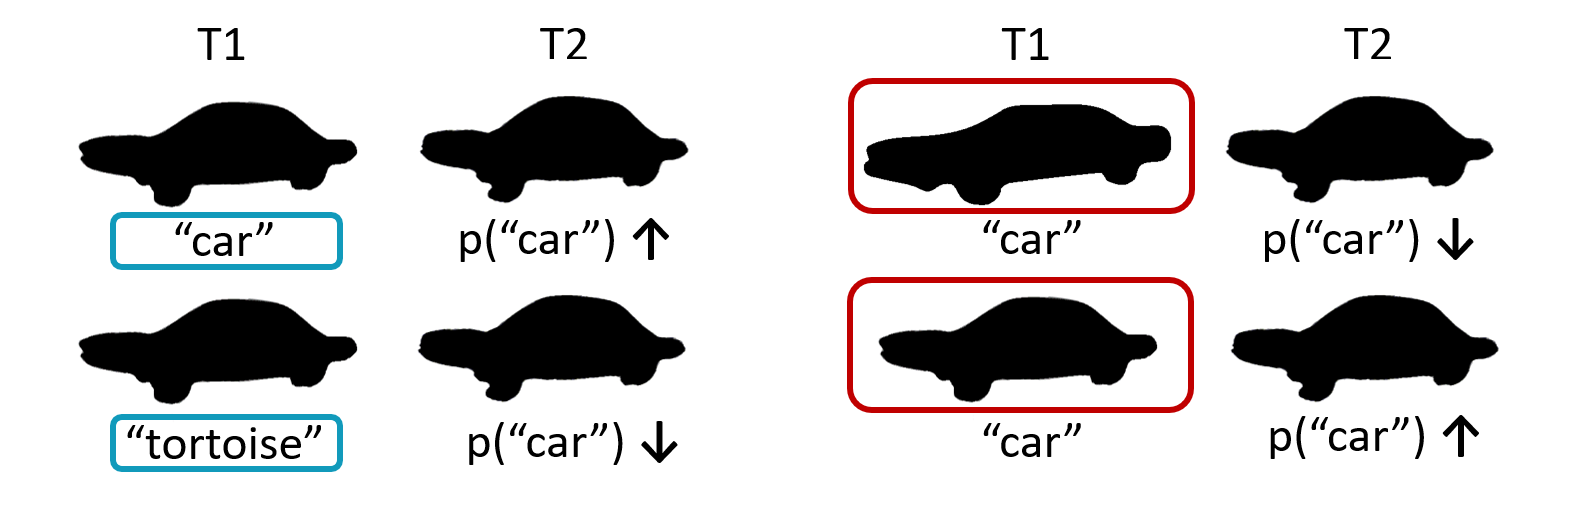 Illustration of attractive and repulsive context effects. Left: attraction effect (hysteresis). When the stimulus is perceived as a car at time 1 (T1), the probability that another stimulus at time 2 (T2) will be perceived as a car is higher than when the stimulus at T1 was interpreted as a tortoise. Right: repulsion effect (adaptation). When the stimulus at T1 is a very clear example of a car, the probability that another stimulus at T2 will be perceived as a car is lower than when the stimulus at T1 was a more ambiguous example of a car.